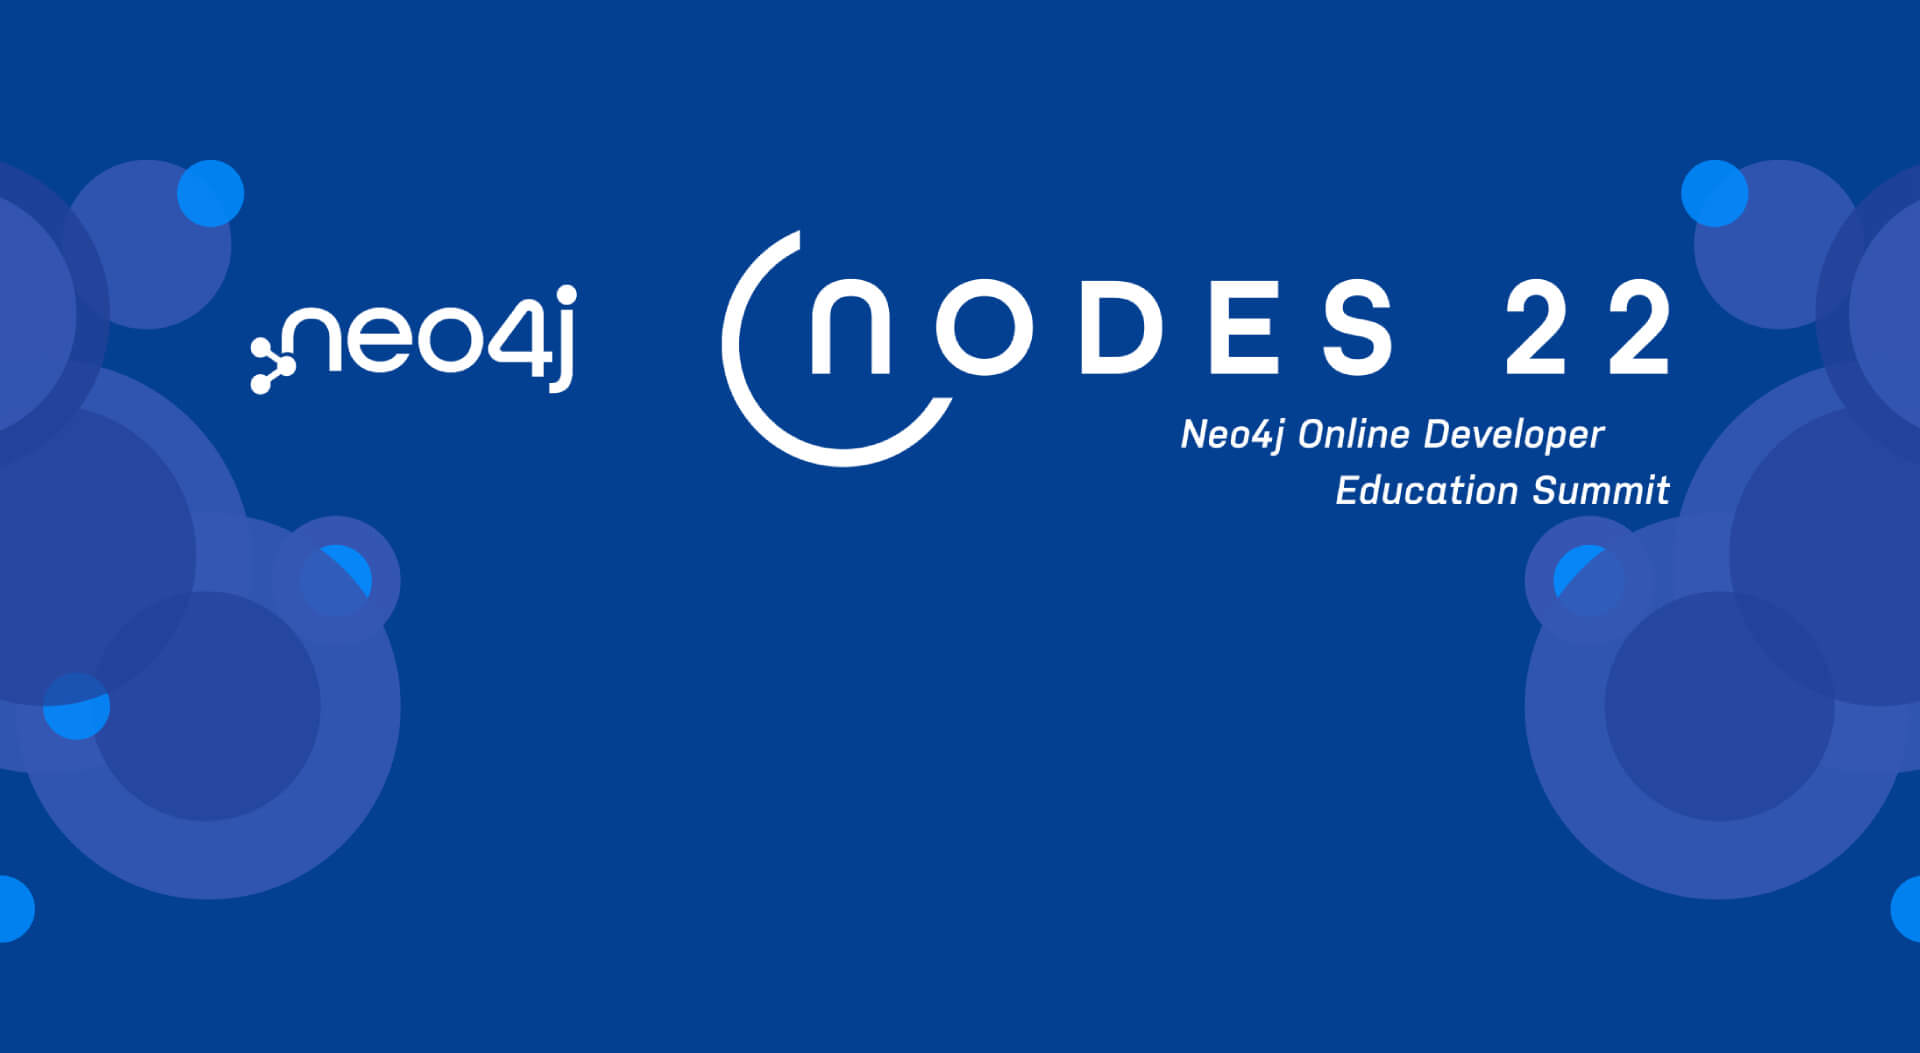 "Neo4j nodes conferences 2022" on blue background with circular graphics